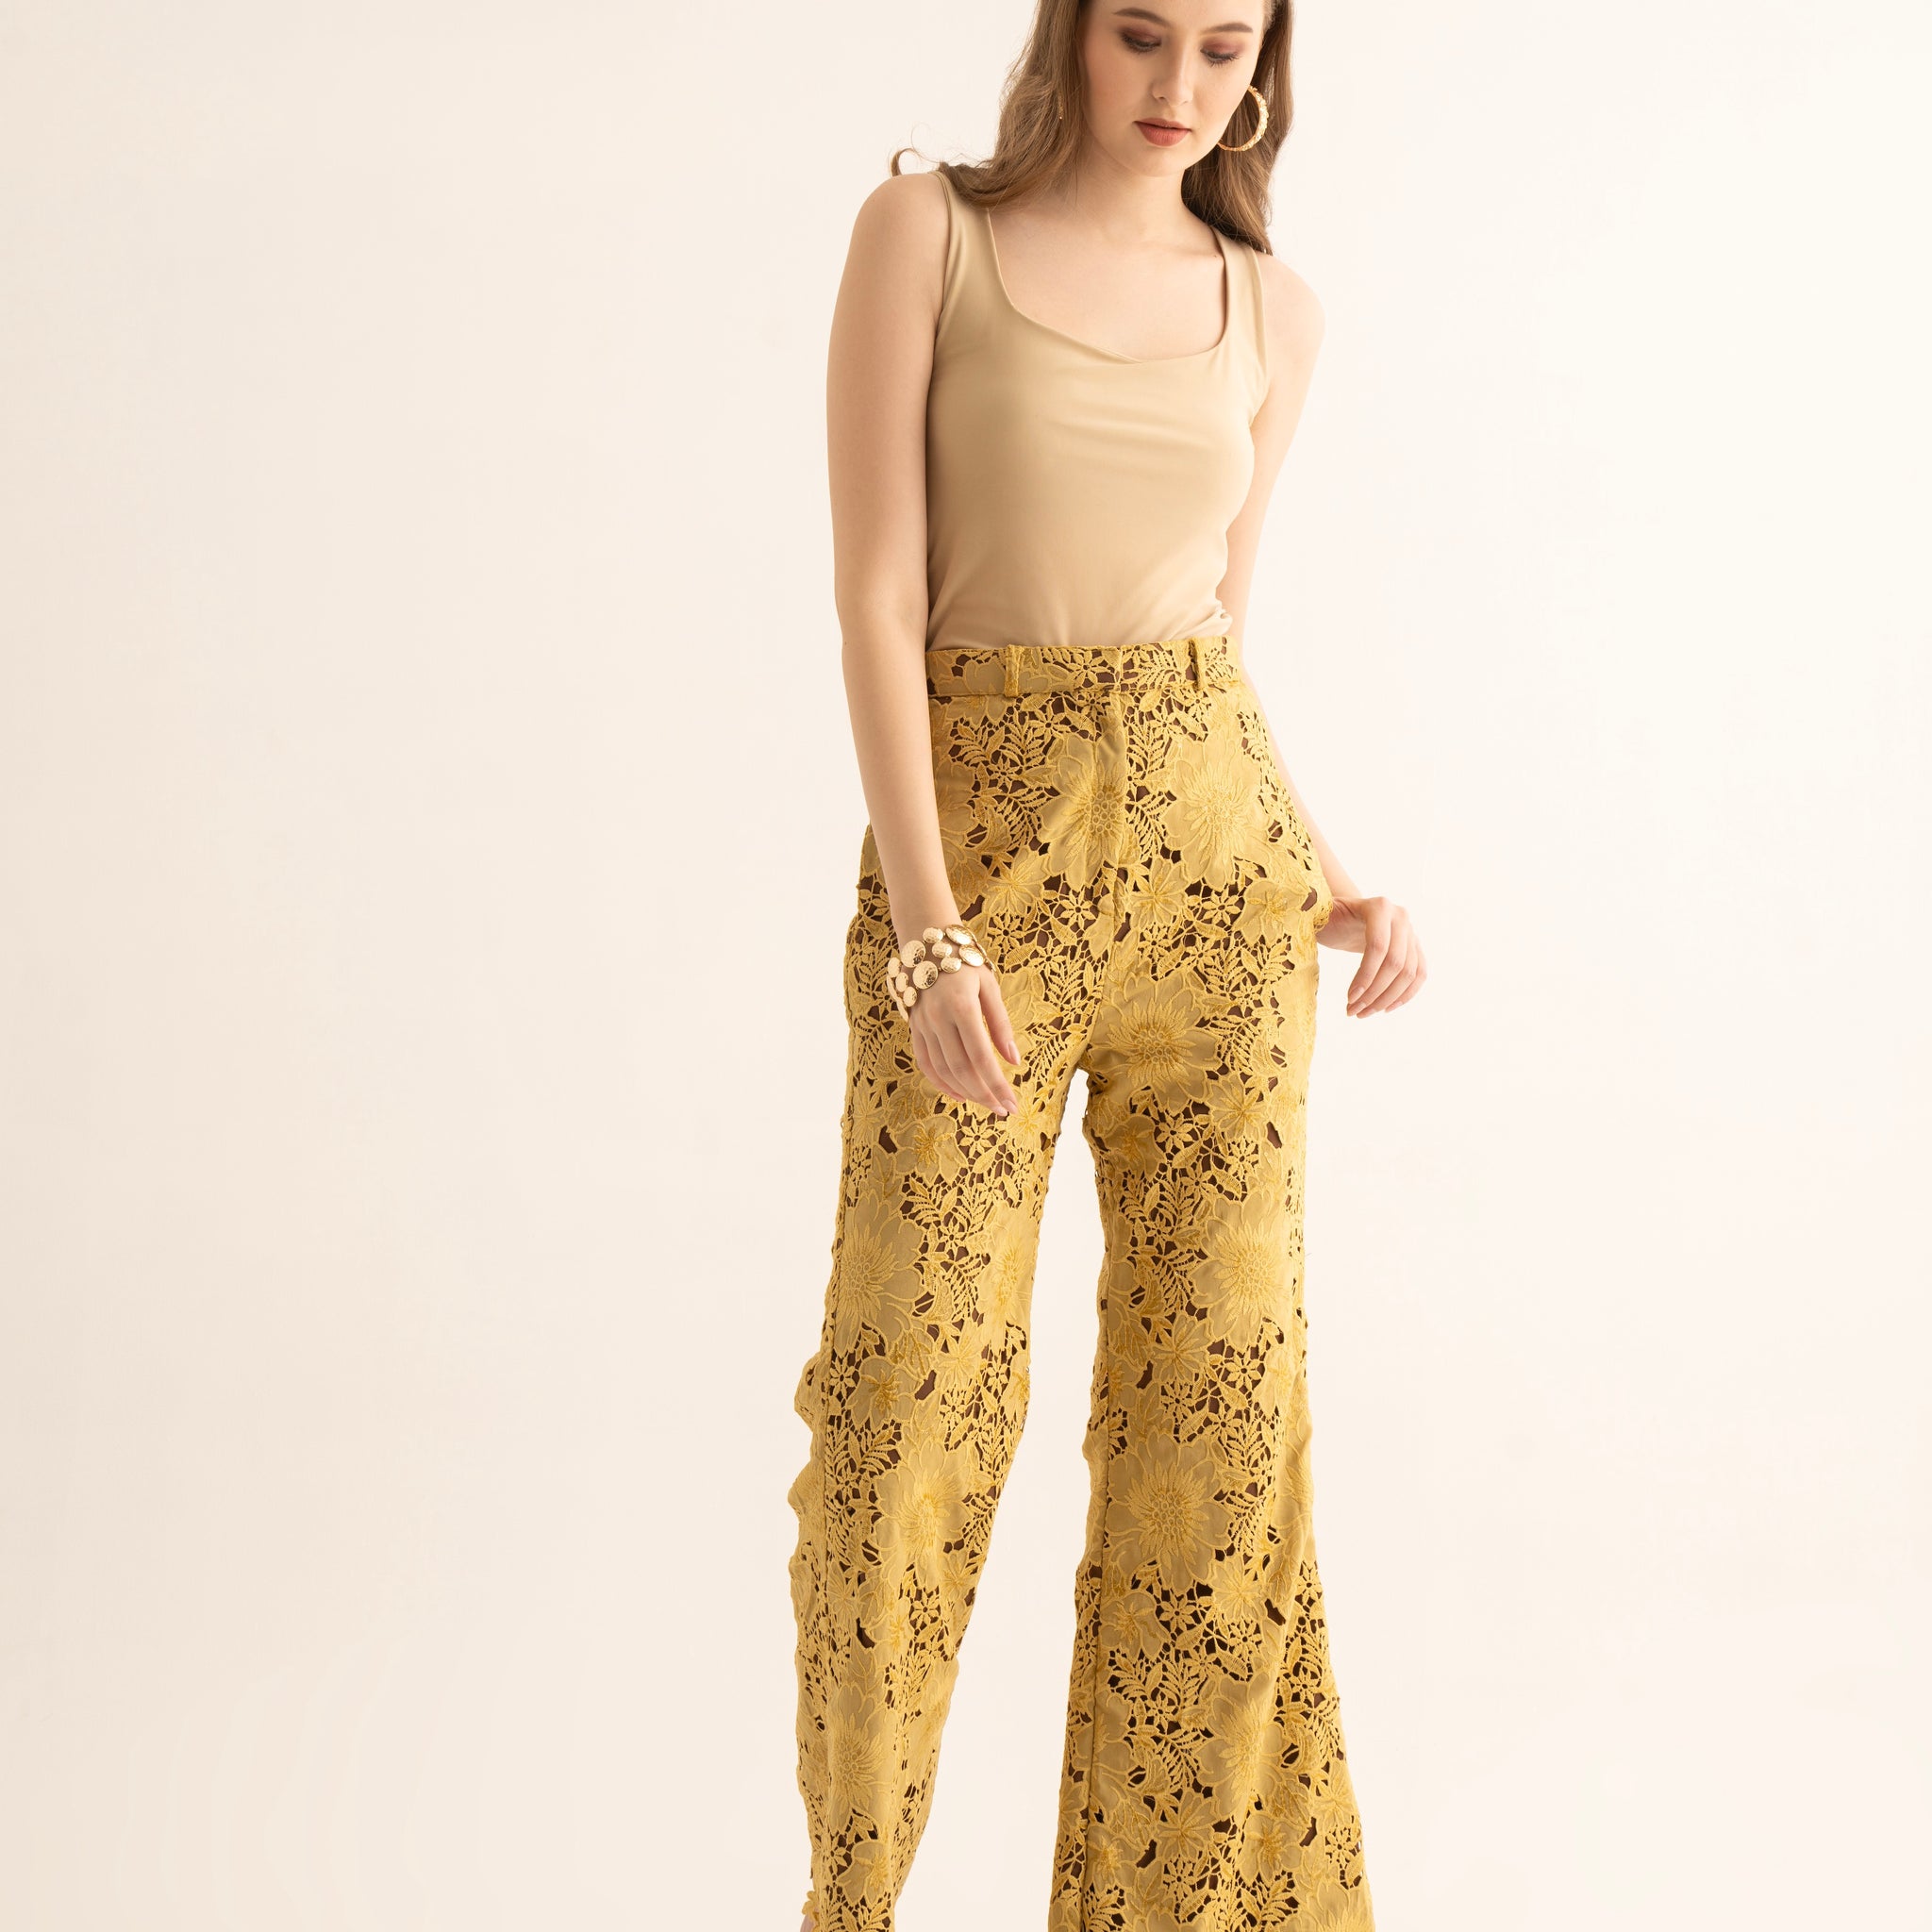 Cream Square Neck Top and Mellow Yellow Pants Co-ord Set